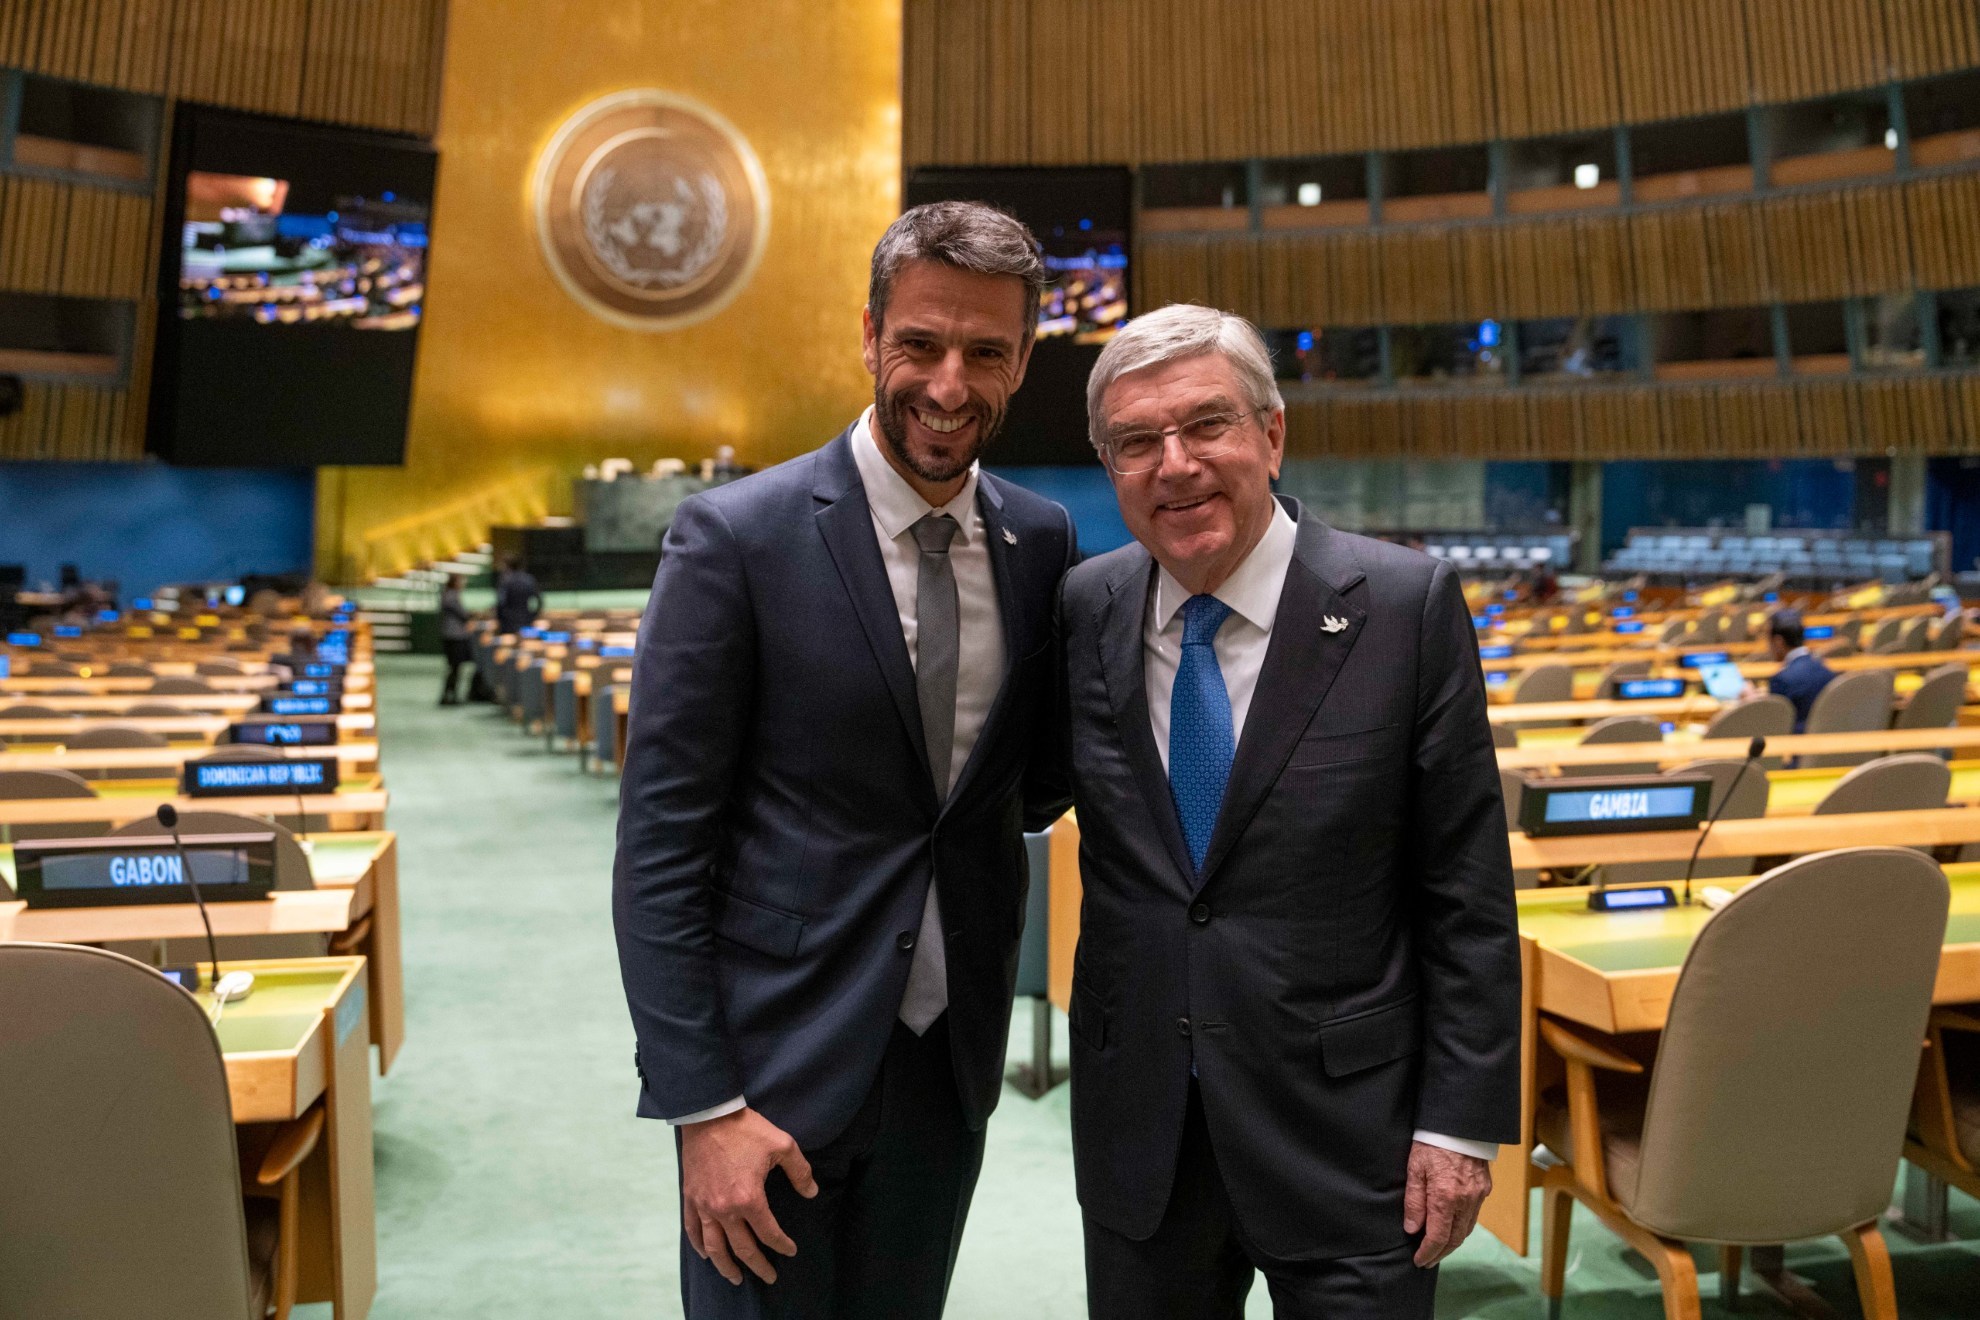 Thomas Bach, president of the International Olympic Committee, and Tony Estanguet, president of the Organizing Committee of the Paris 2024 Olympic and Paralympic Games, at UN headquarters.